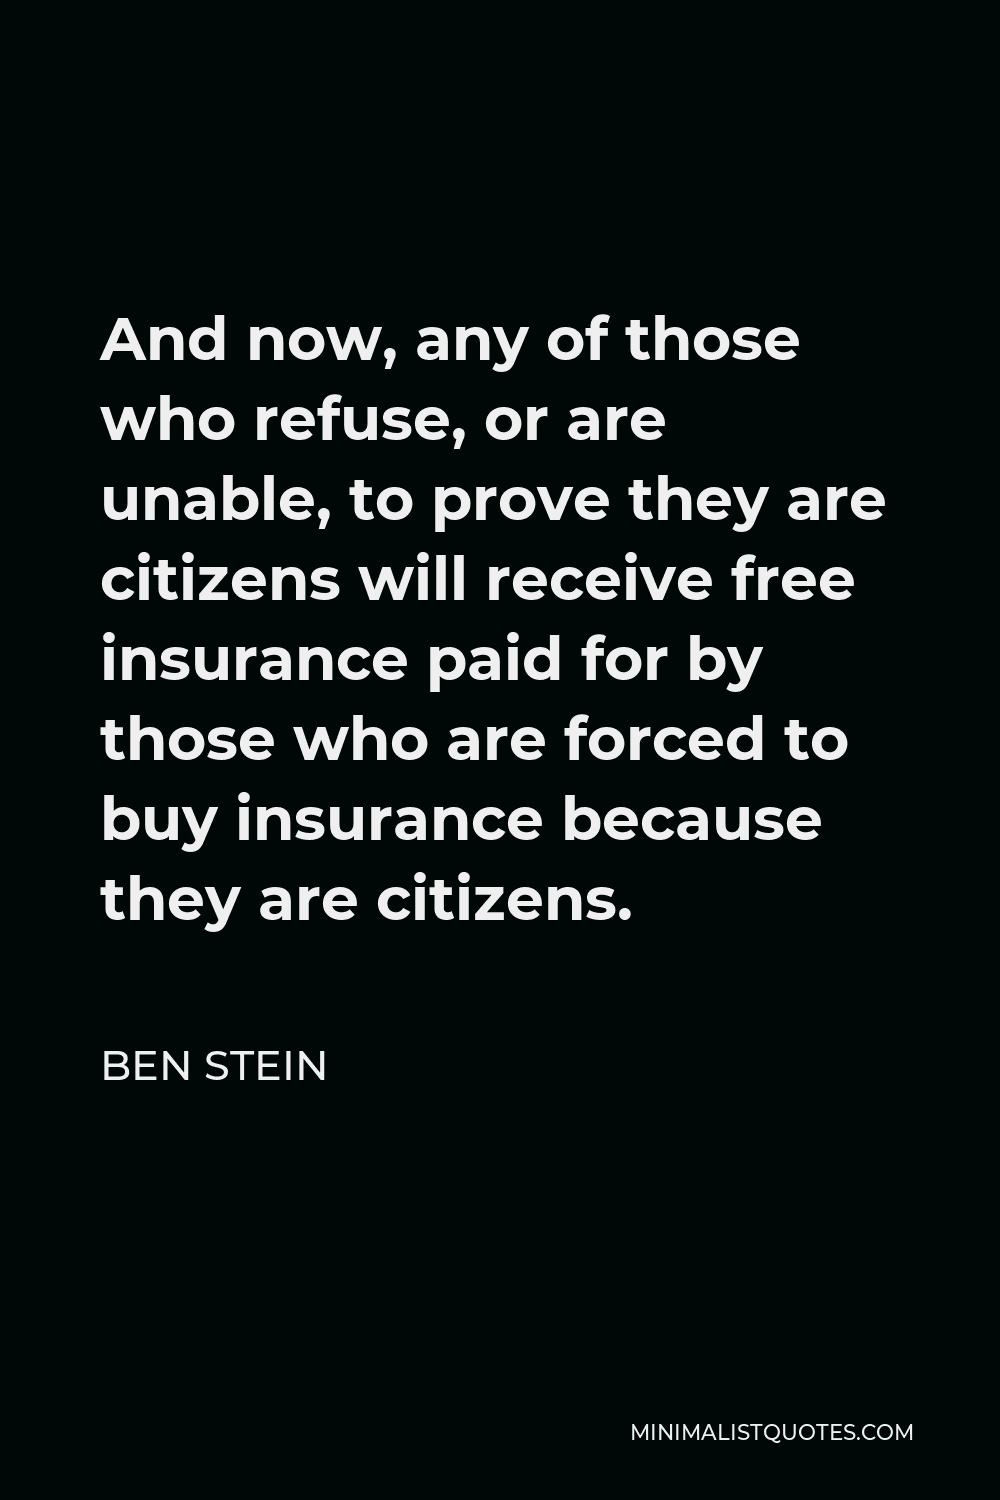 Ben Stein Quote - And now, any of those who refuse, or are unable, to prove they are citizens will receive free insurance paid for by those who are forced to buy insurance because they are citizens.